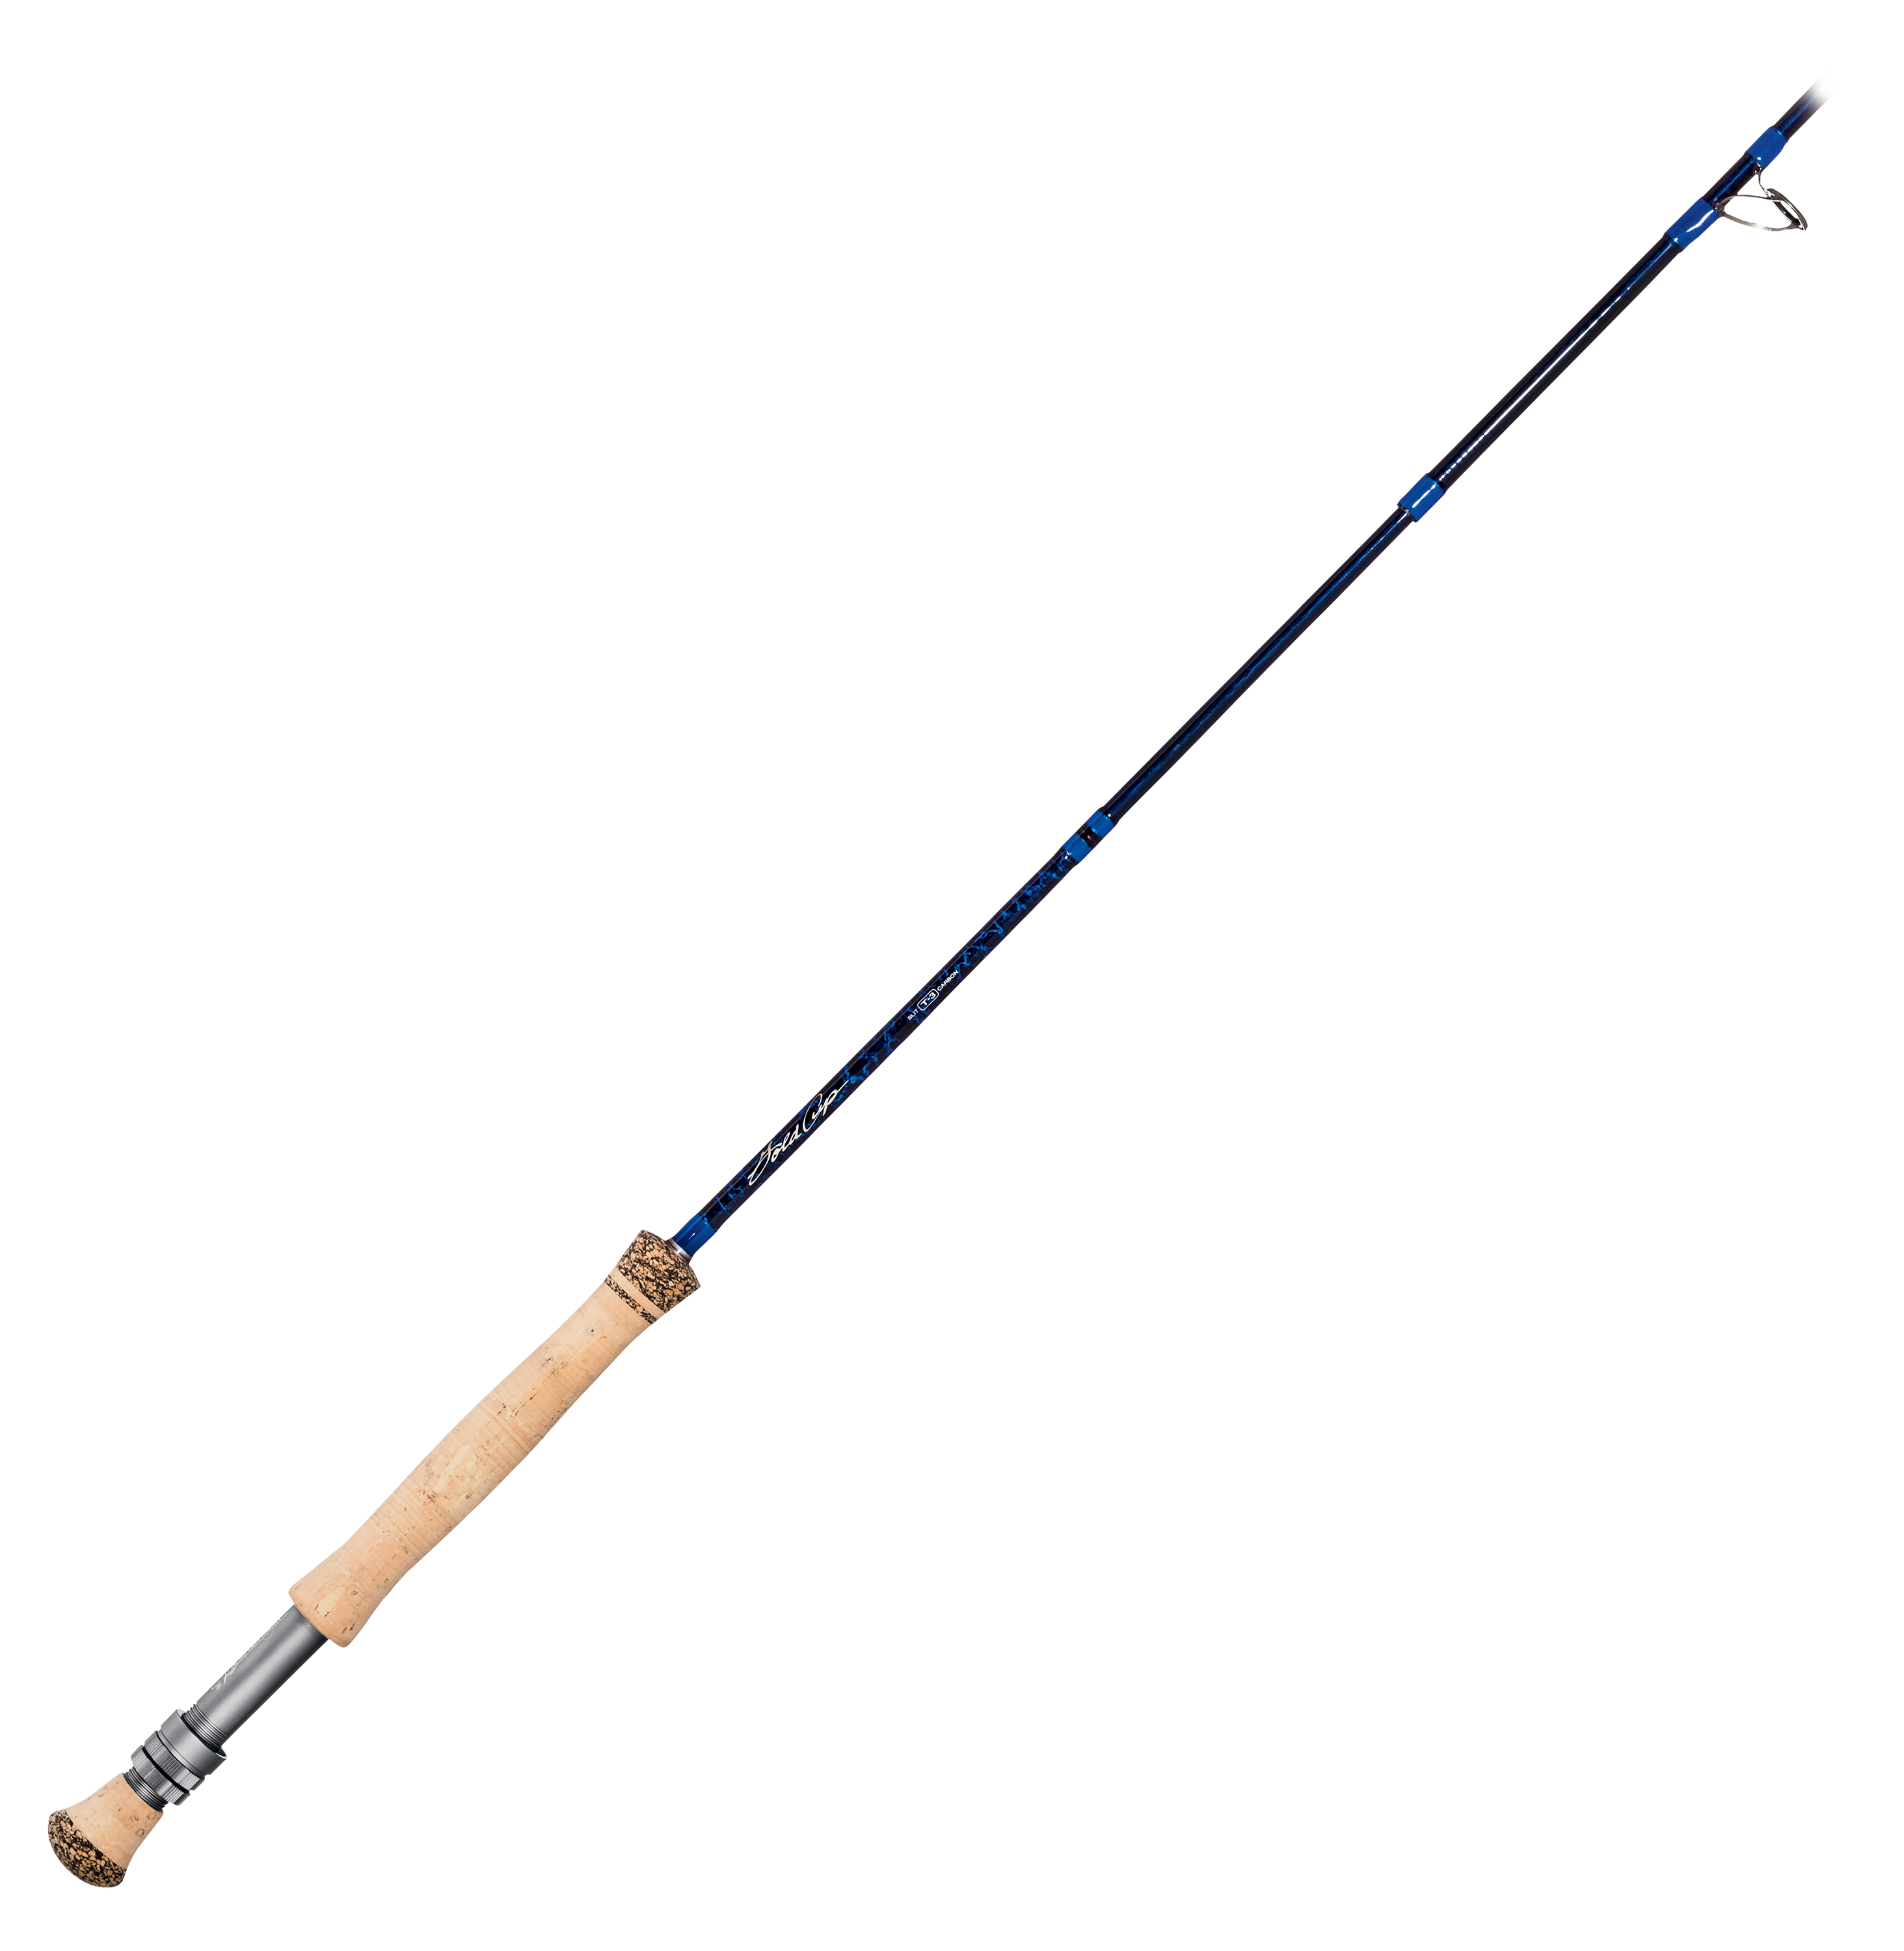 Gold Cup Fly Fishing Rod. GC 9083. 9’ 8wt. W/ Tube and Sock.